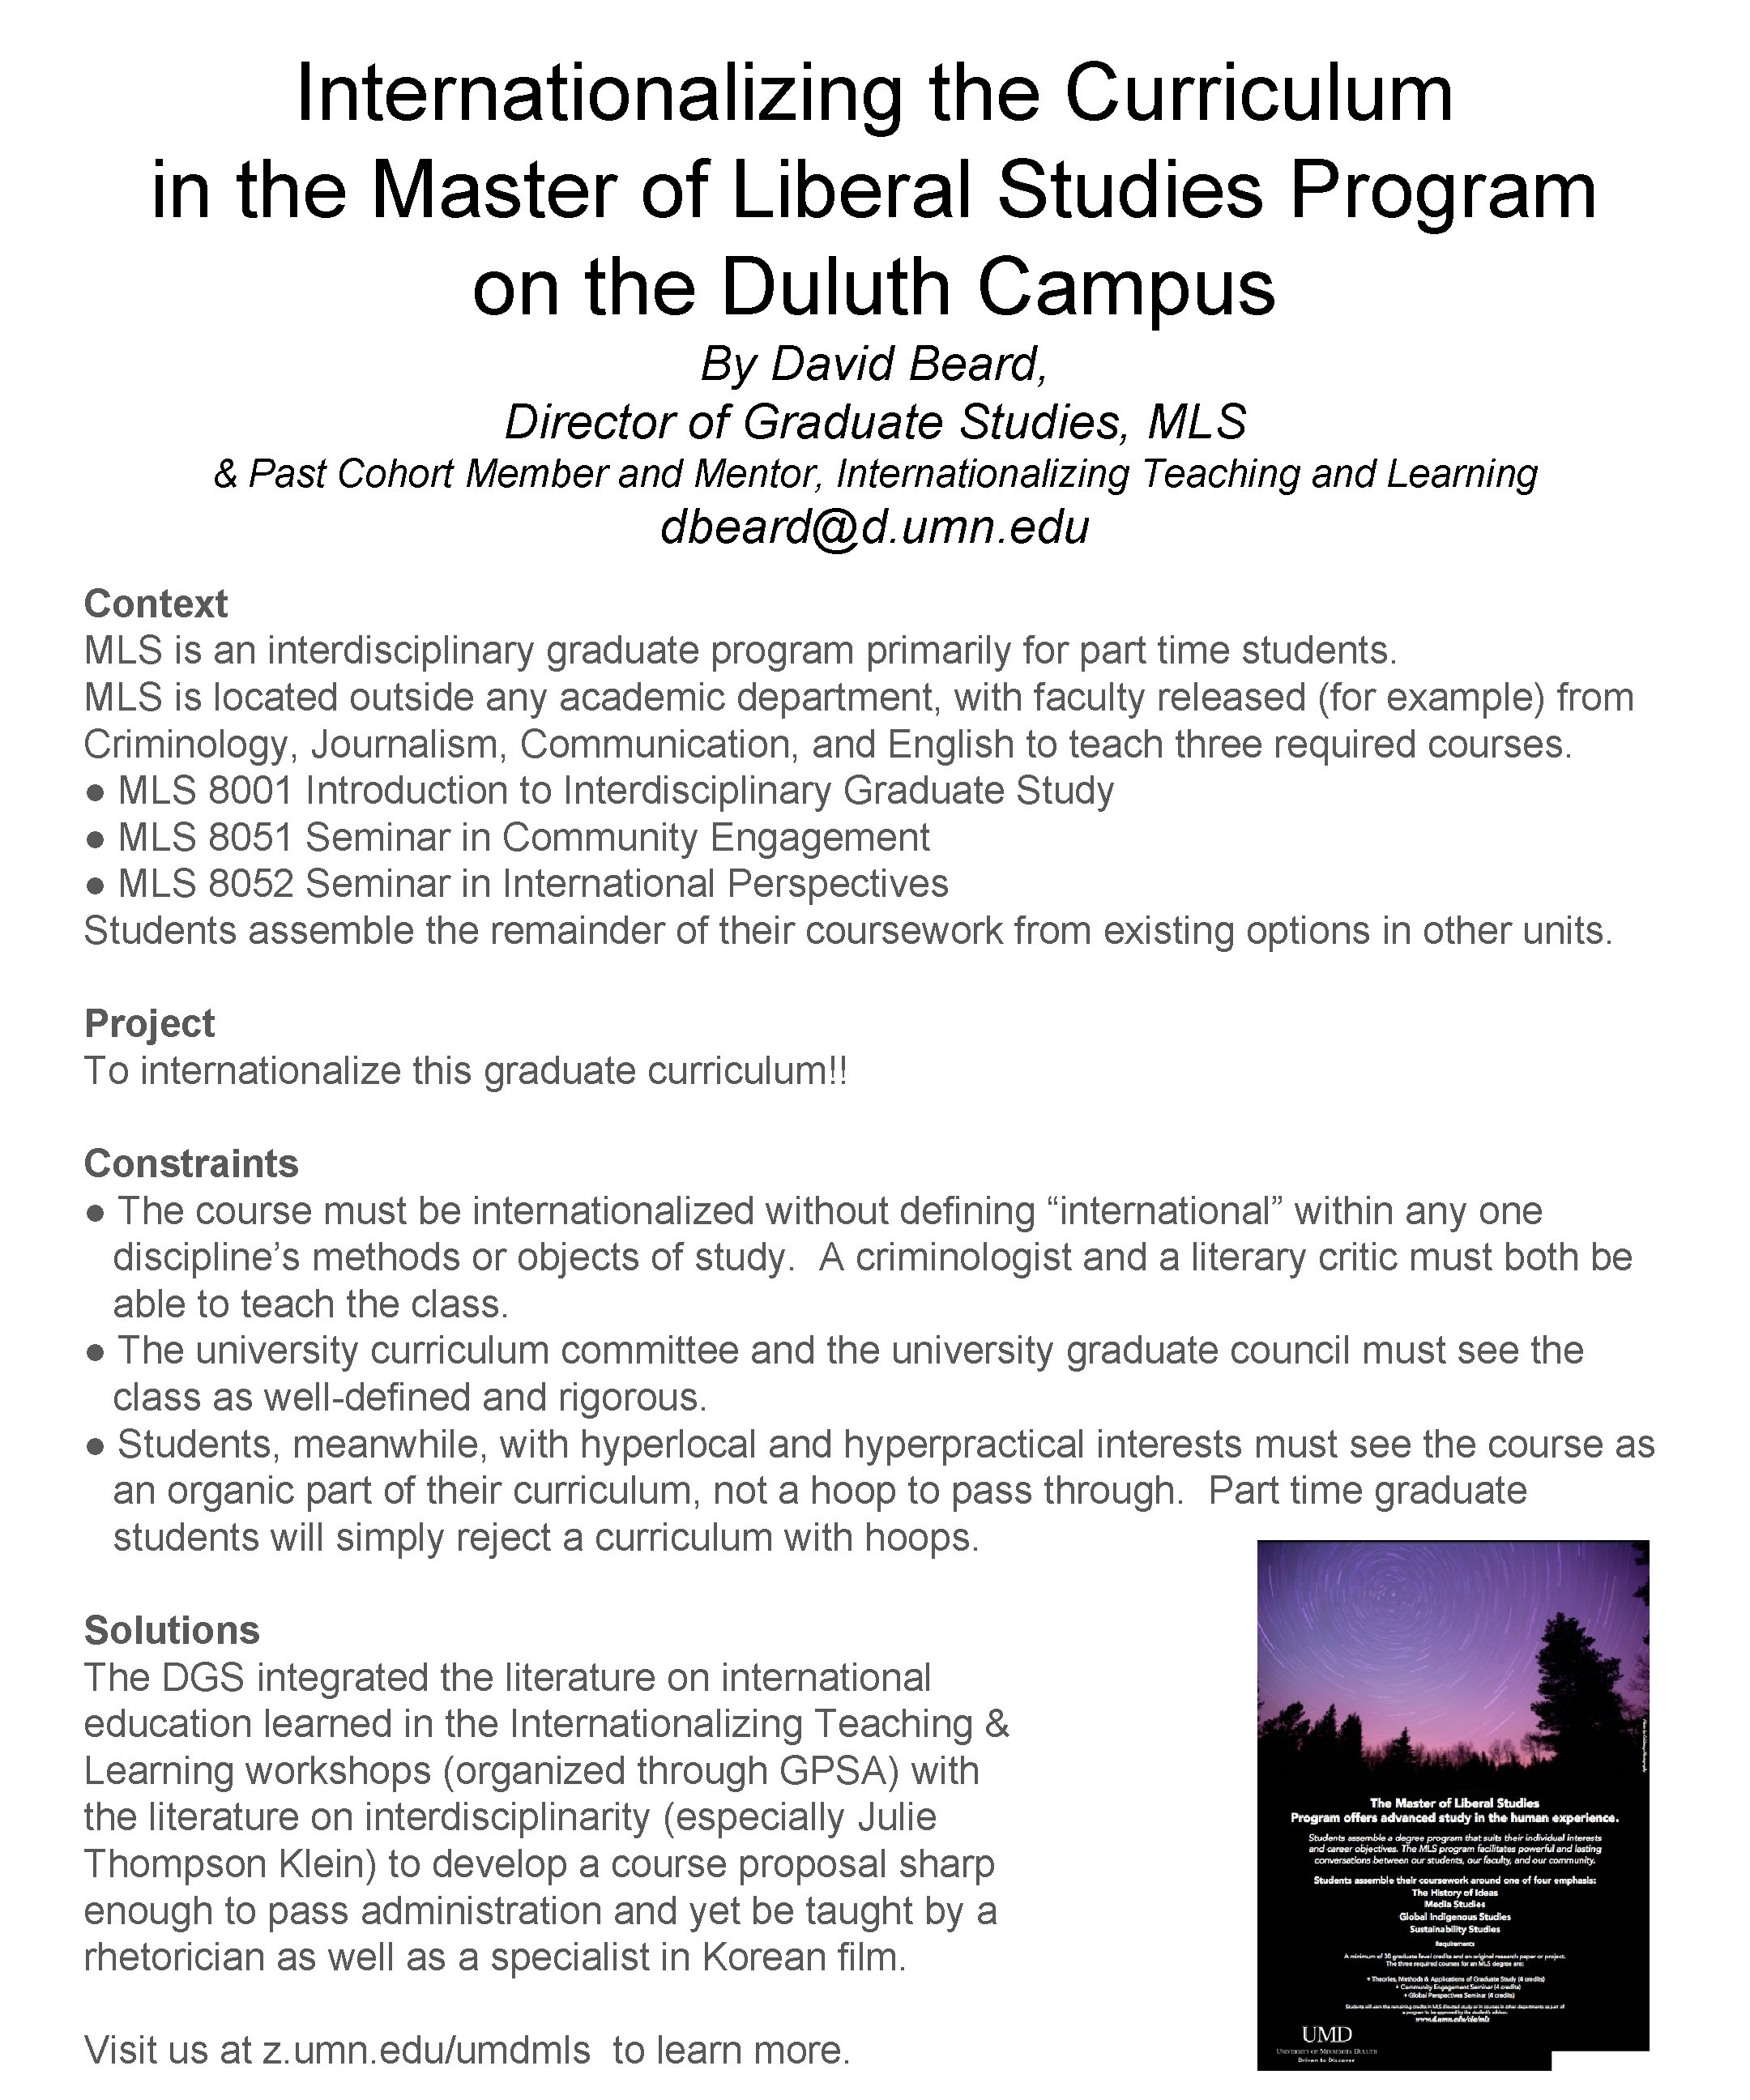 Internationalizing the Curriculum in the Master of Liberal Studies Program on the Duluth Campus